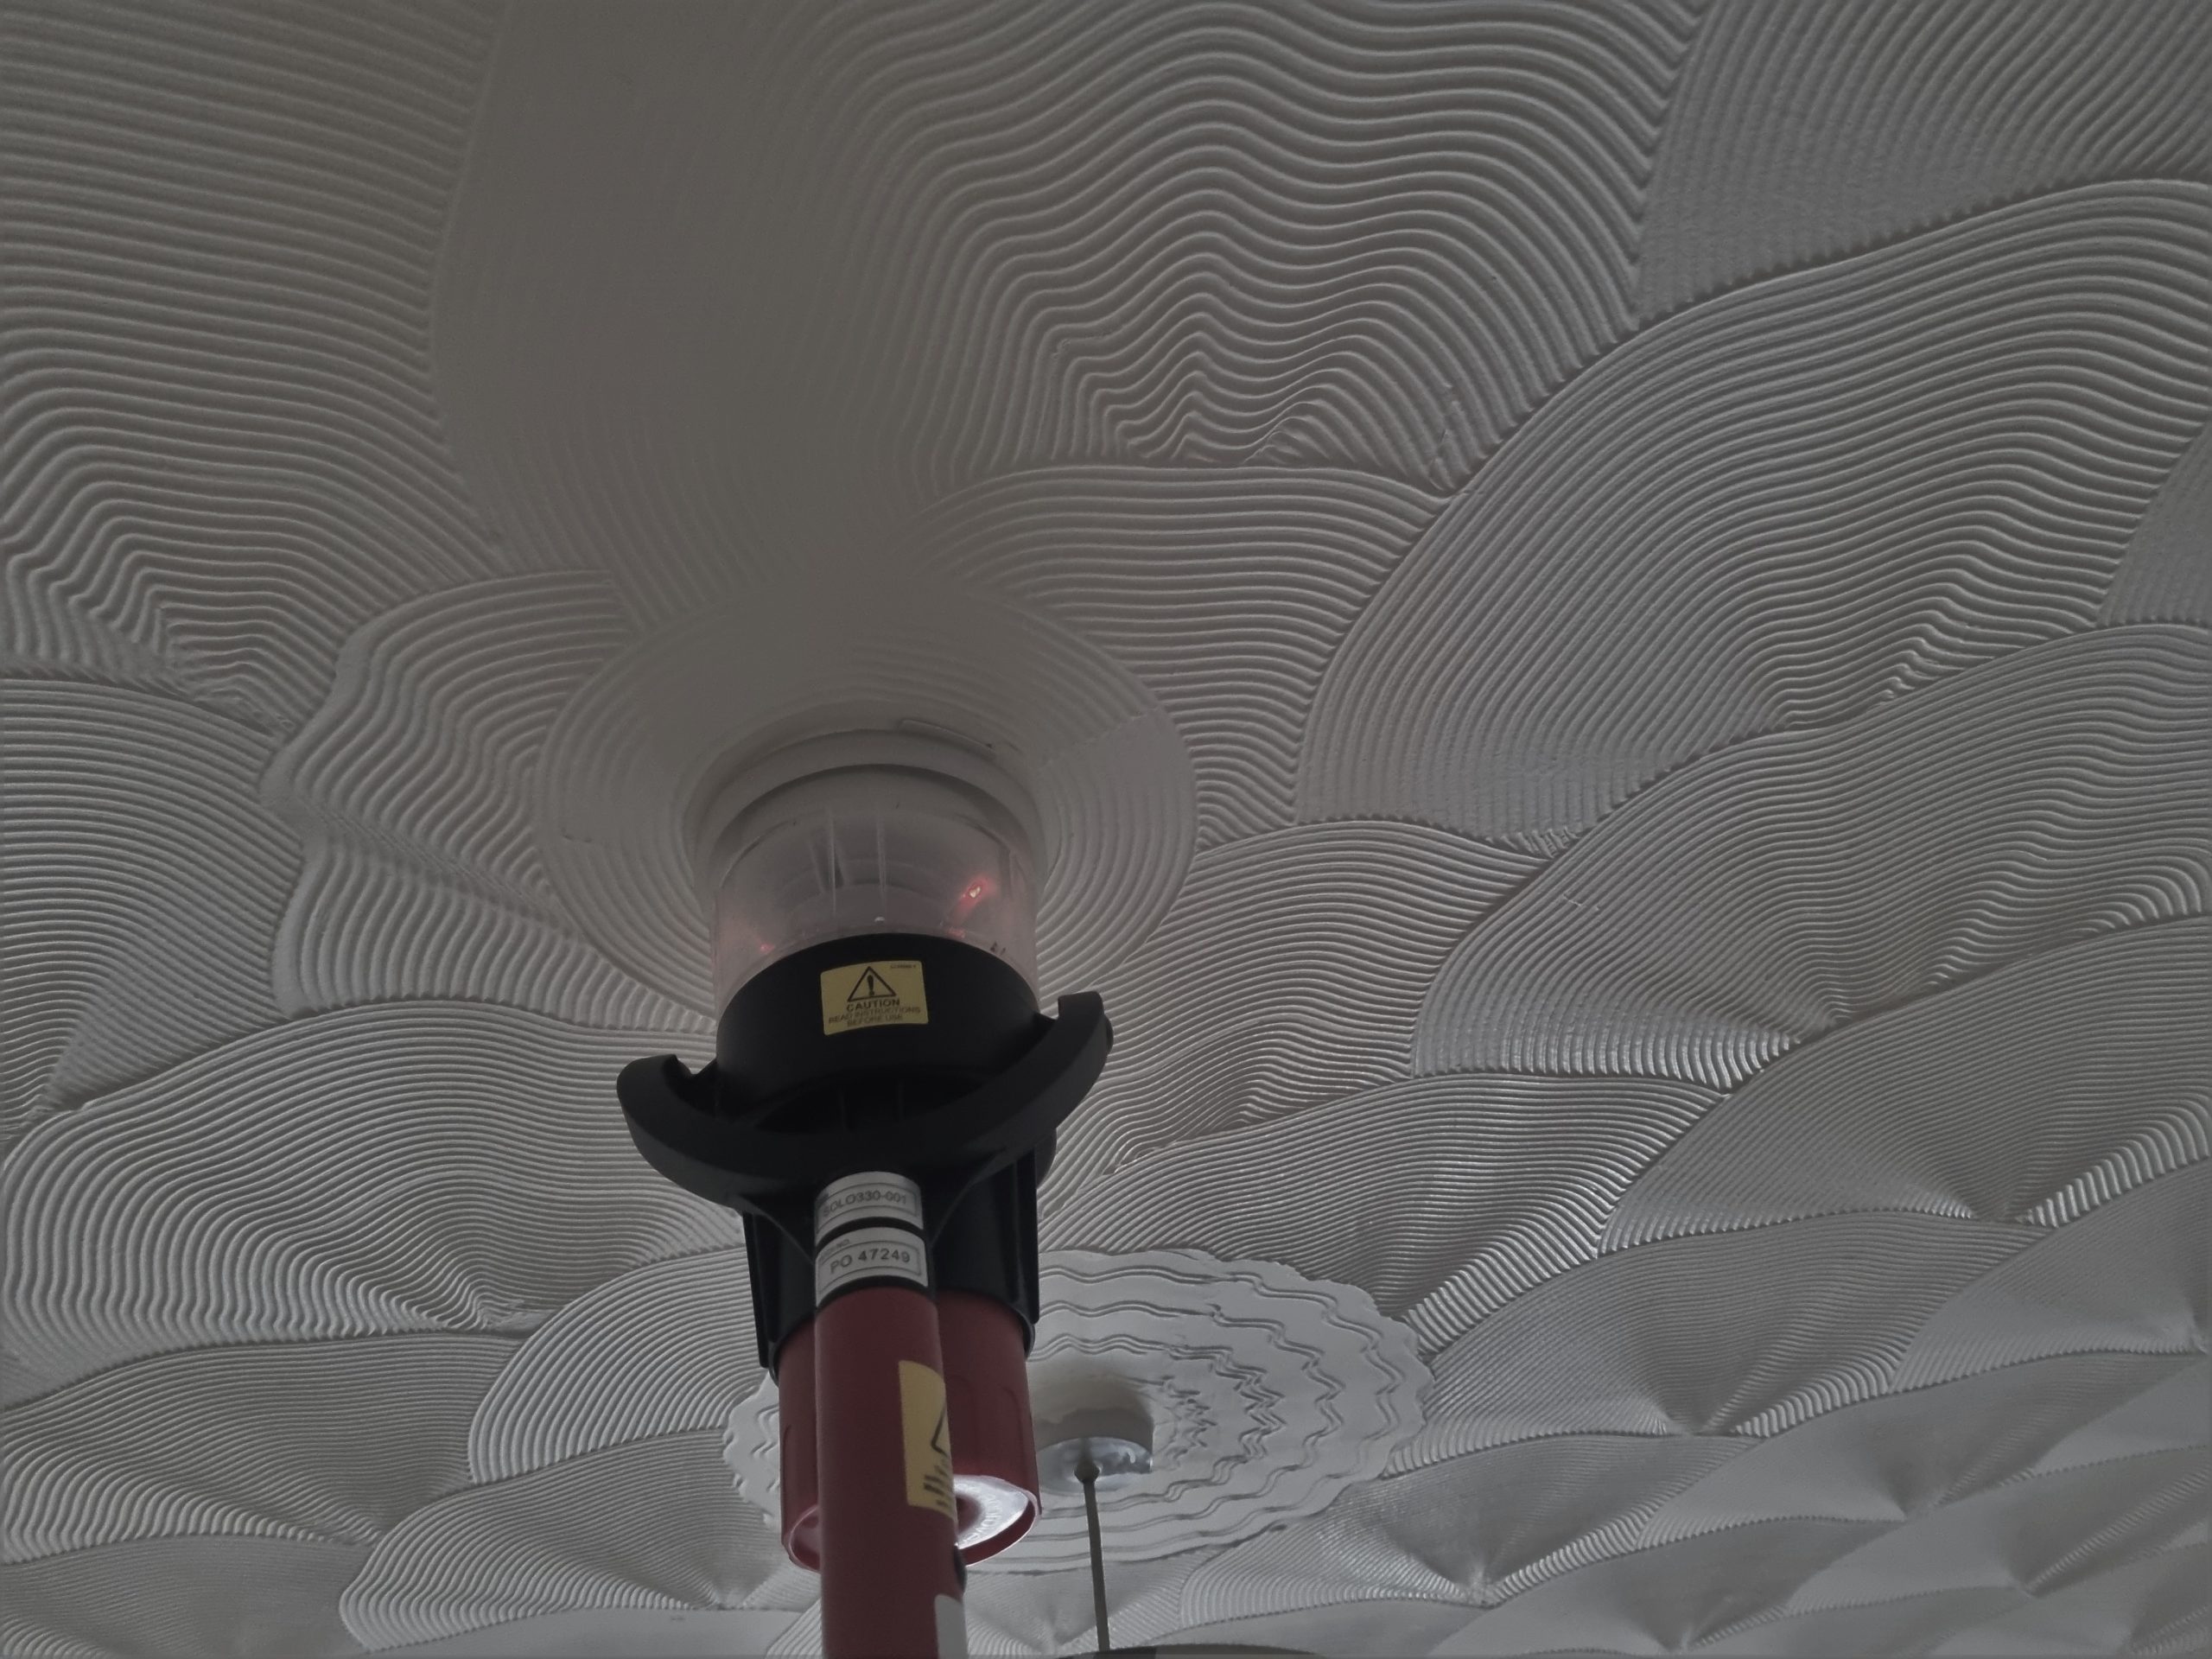 Engineer testing a device smoke detector on a celing as part of a fire alarm maintenance